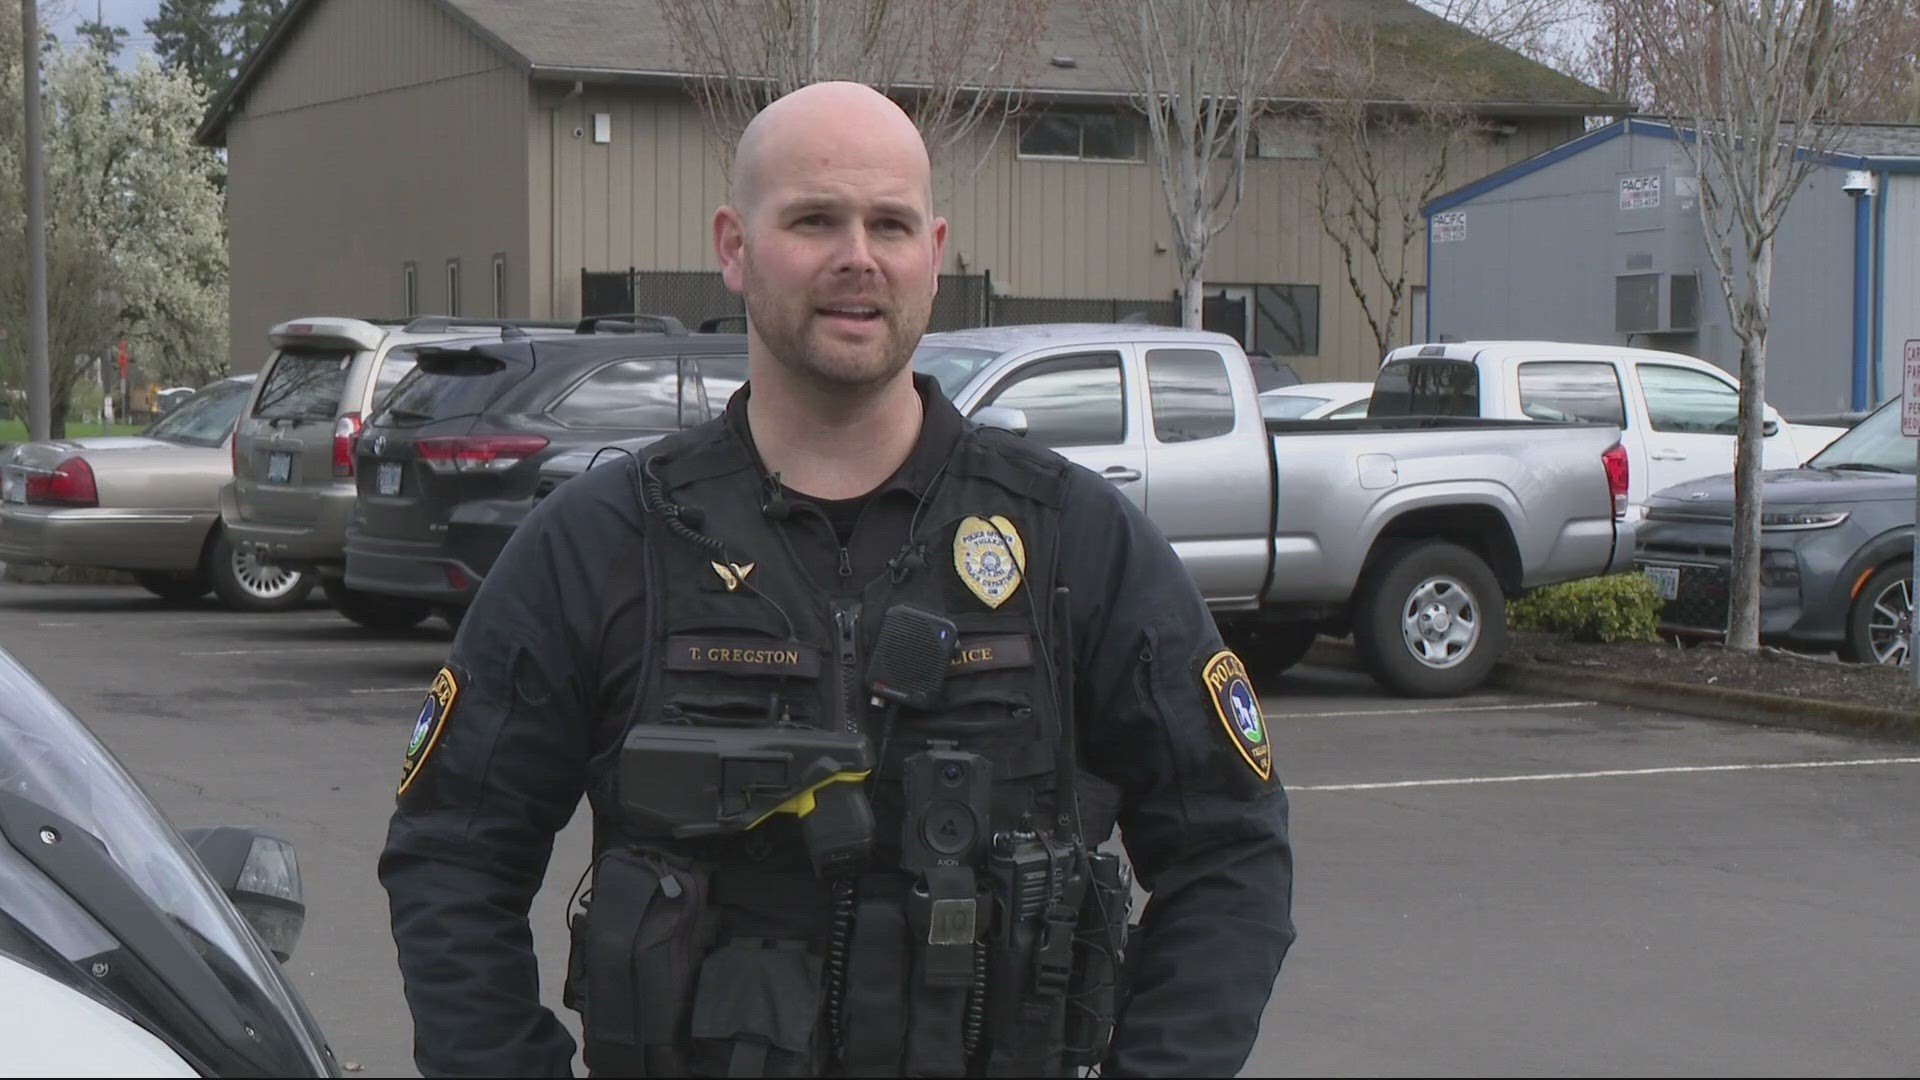 While responding to an emergency call on his motorcycle, Officer Travis Gregston was hit by a SUV.